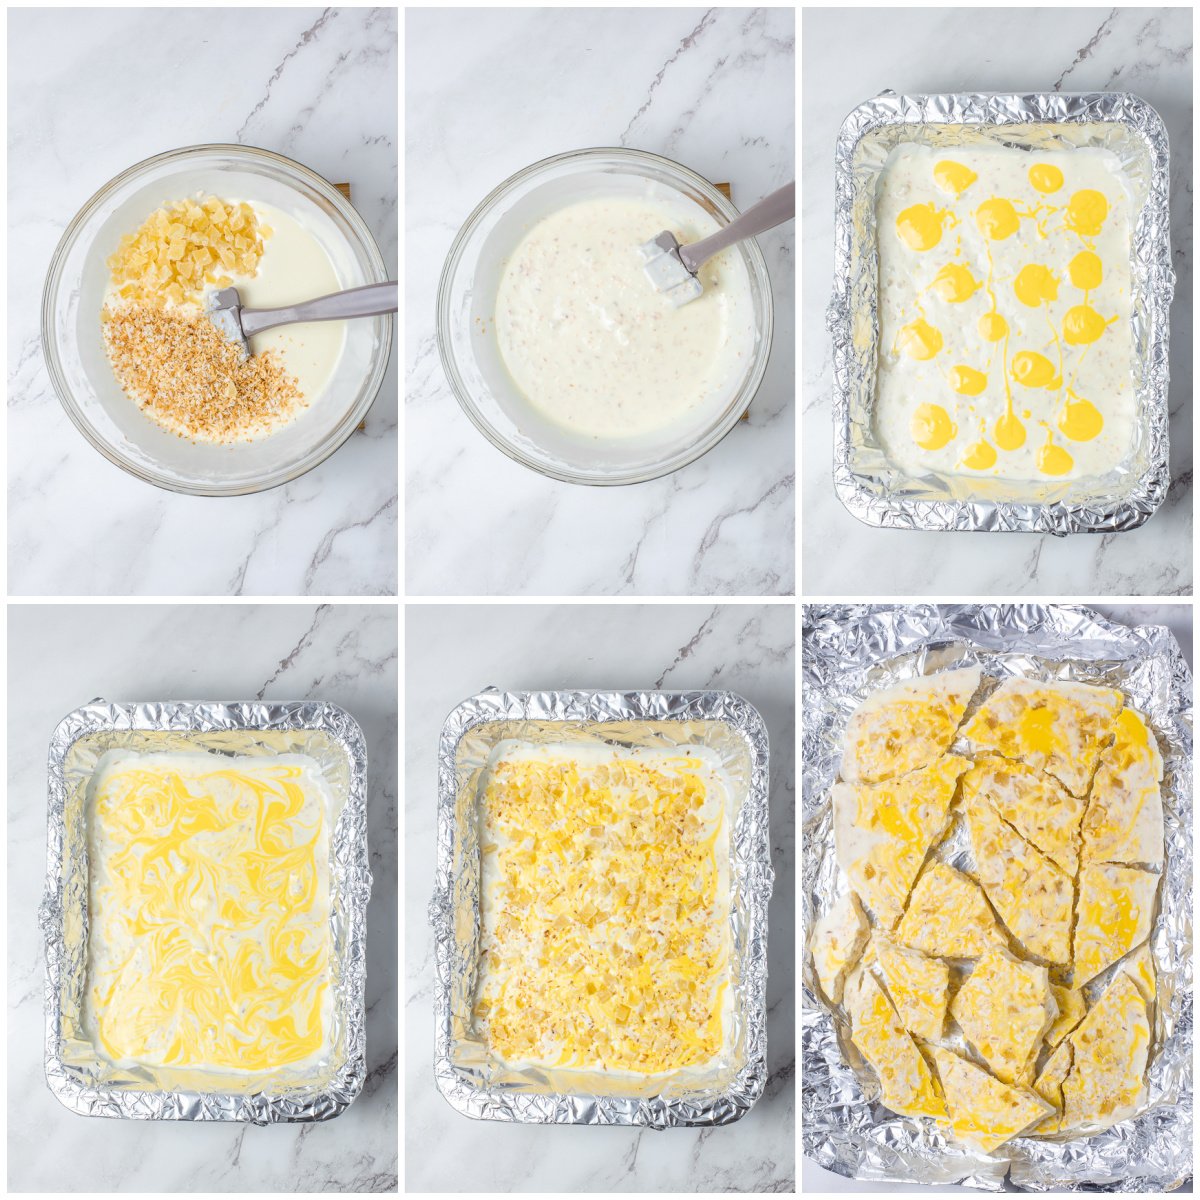 Step by step photos on how to make Pina Colada Bark